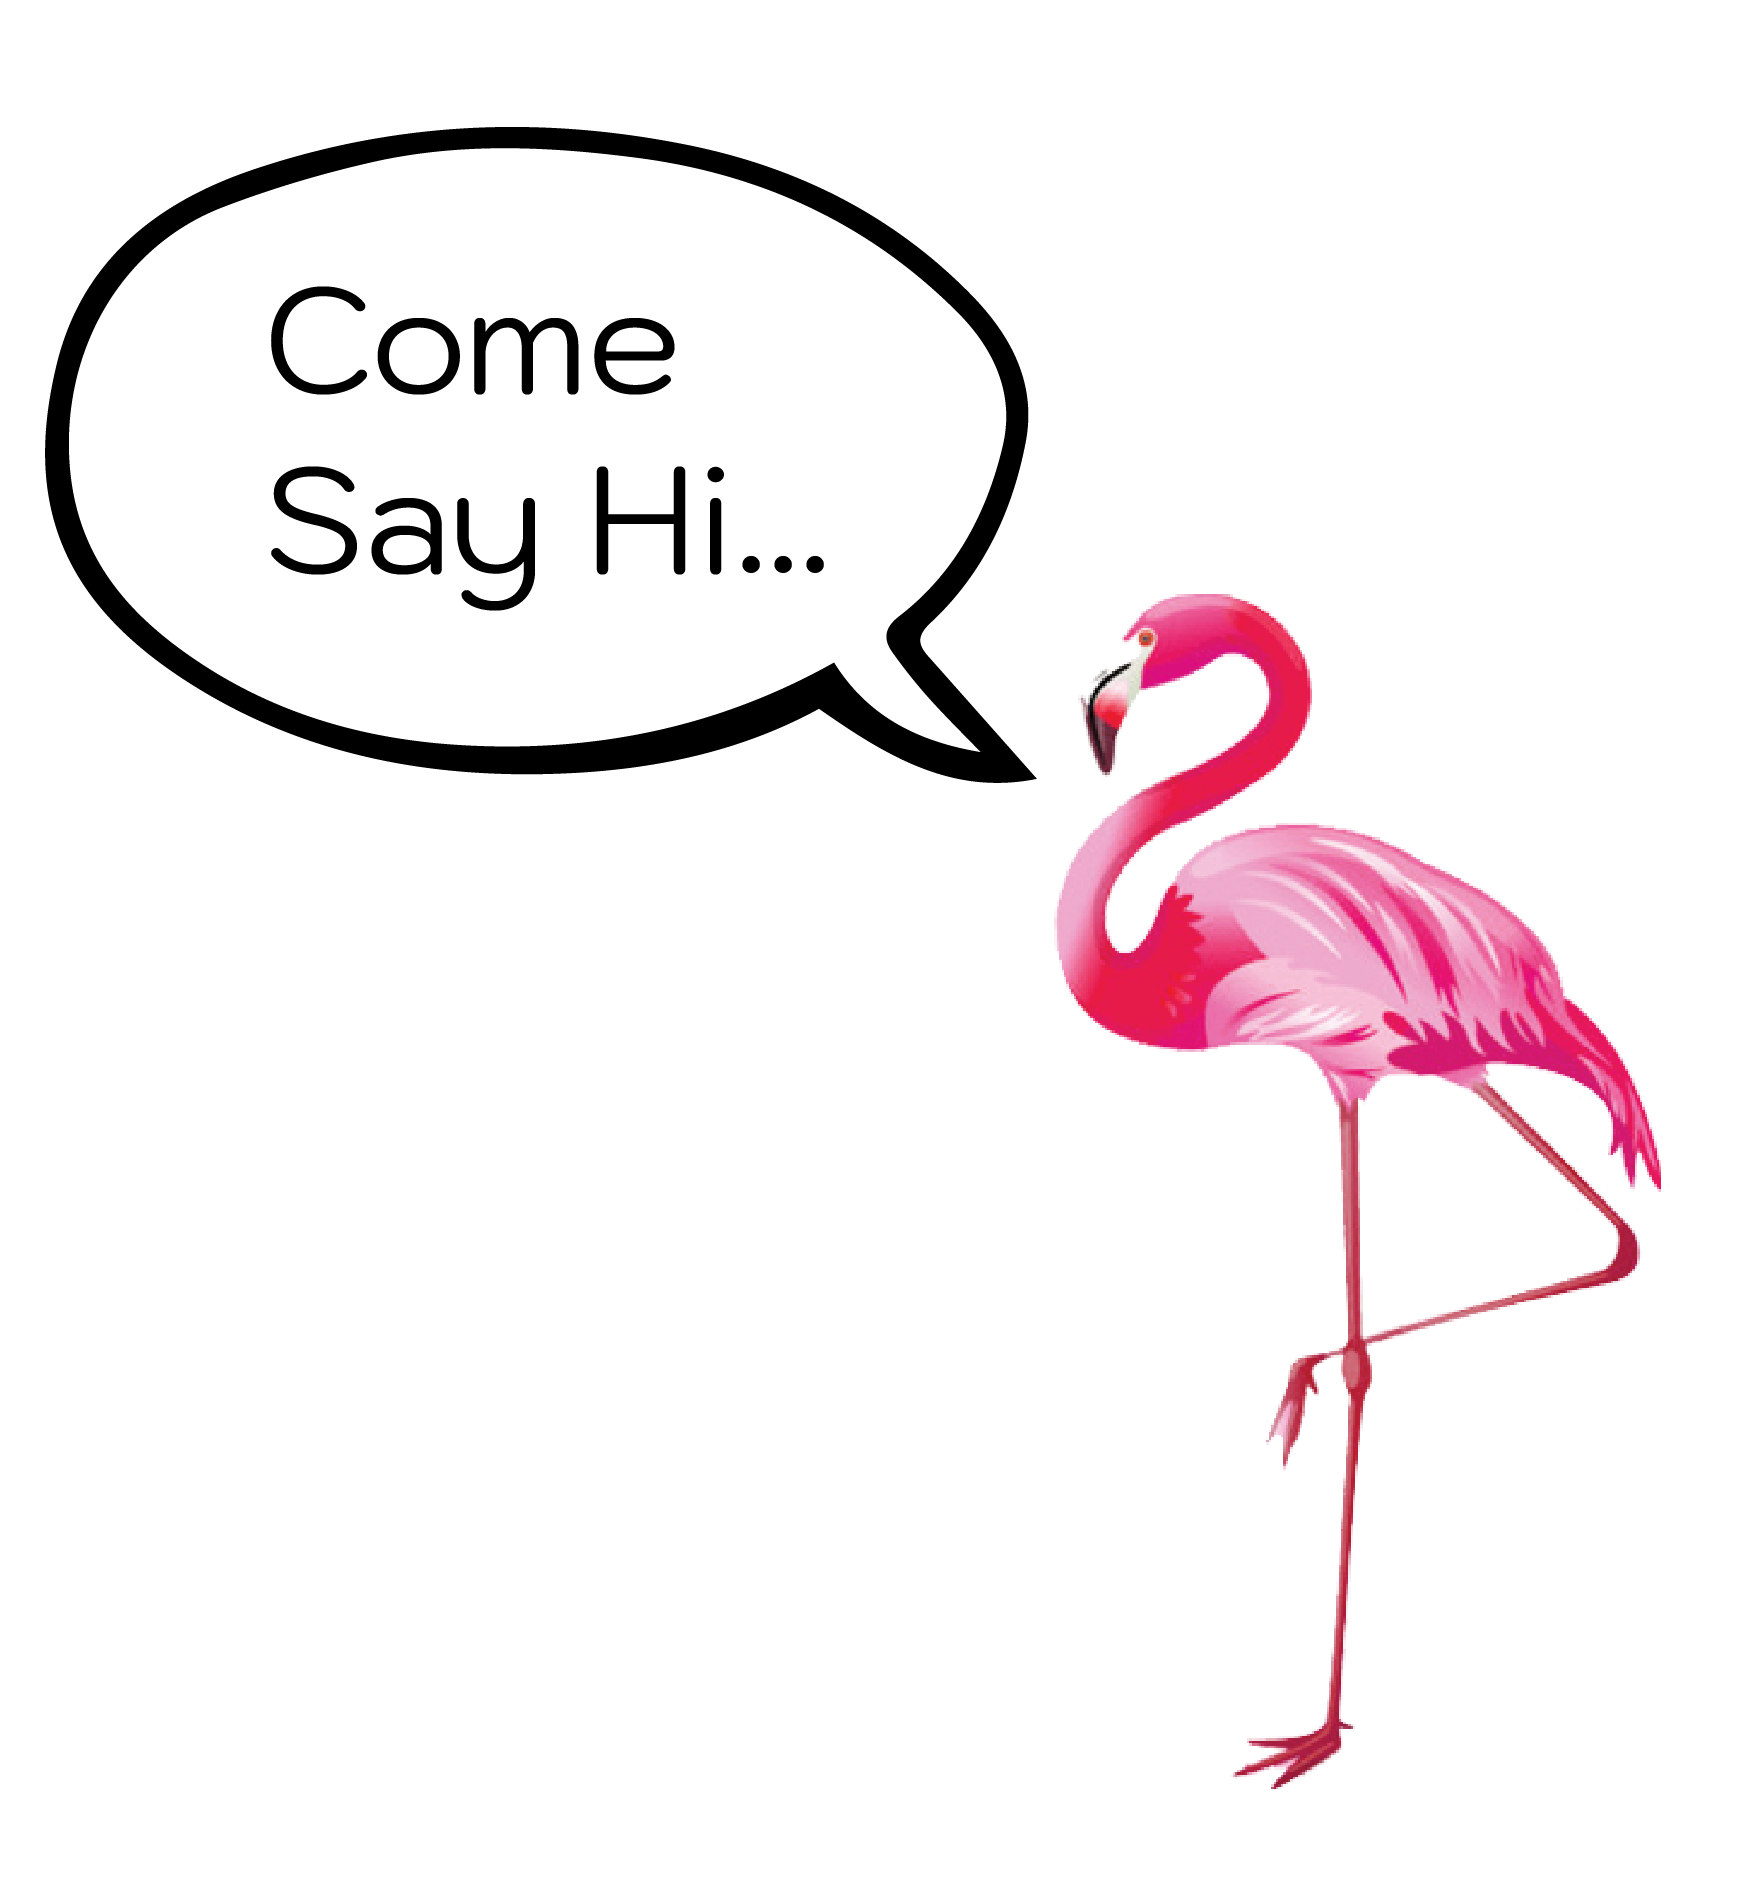 Flamingo Yoga Maya is your wellbeing concierge - online private 1:1 classes, to find your purpose and your 'WHY', build strength and flexibility.